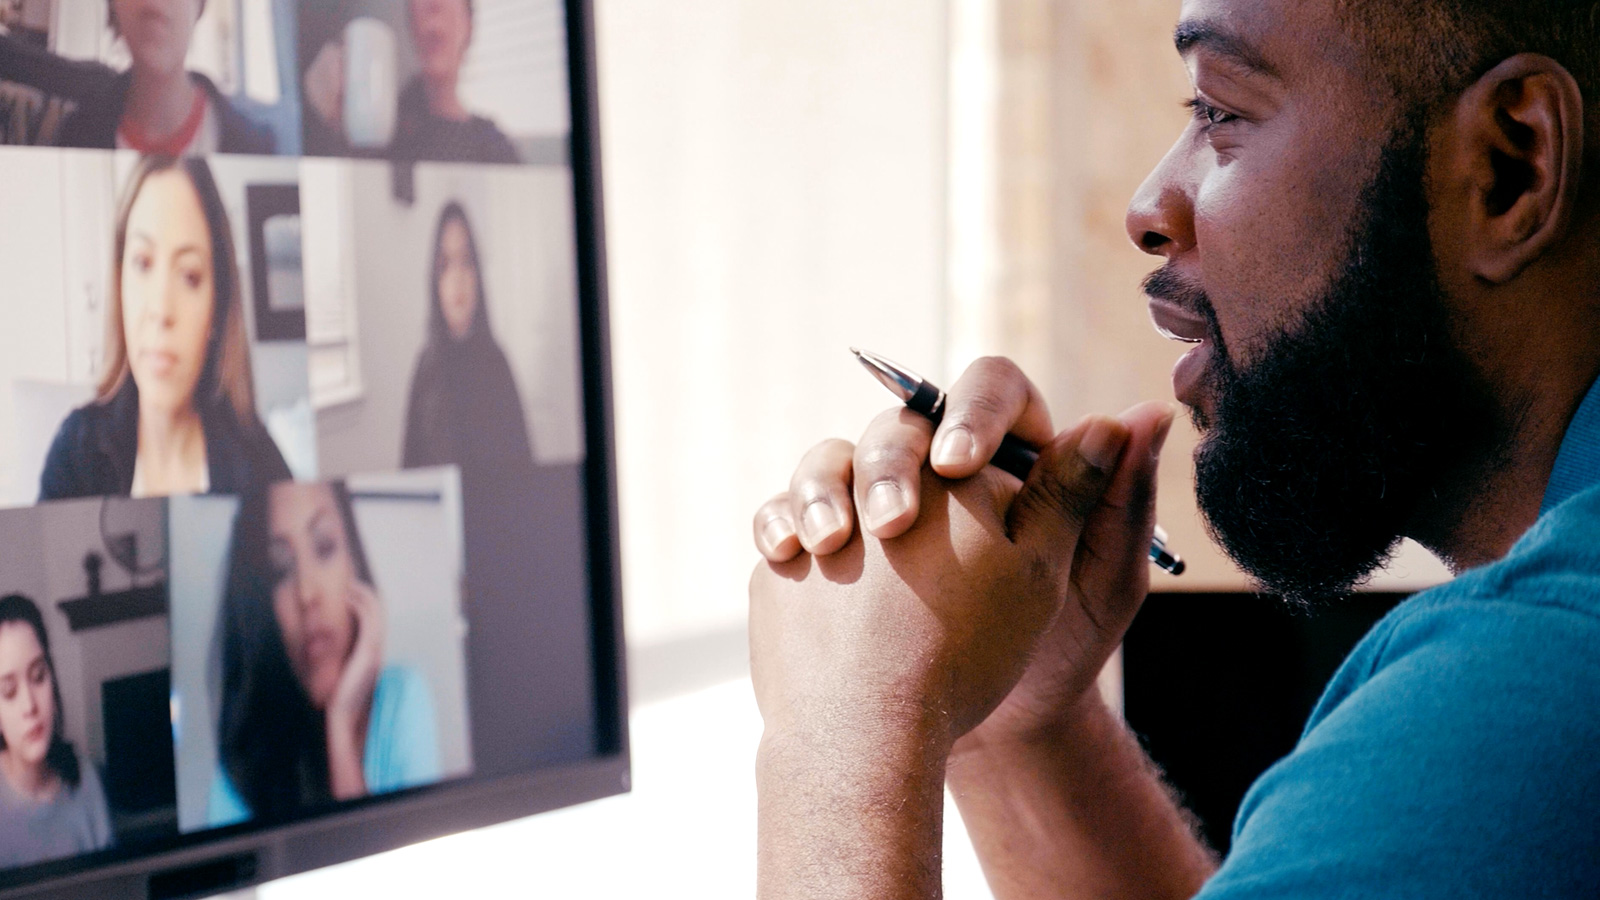 A black man sitting, holding a pen, looking at a computer monitor showing a grid of coworkers' faces